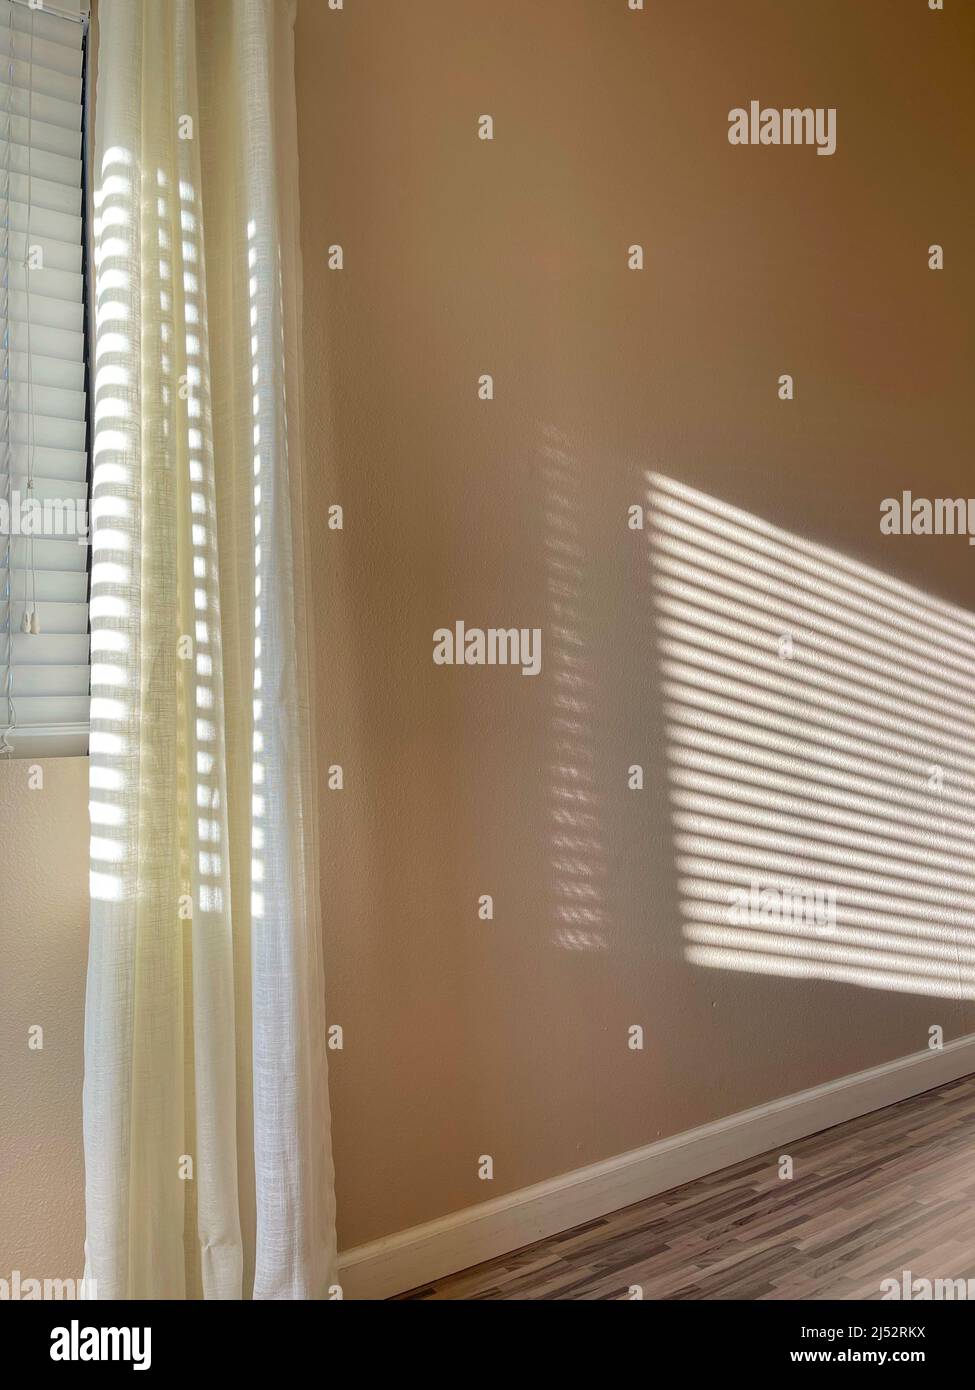 Sunlight streaming in through window blinds making a pattern on the wall Stock Photo